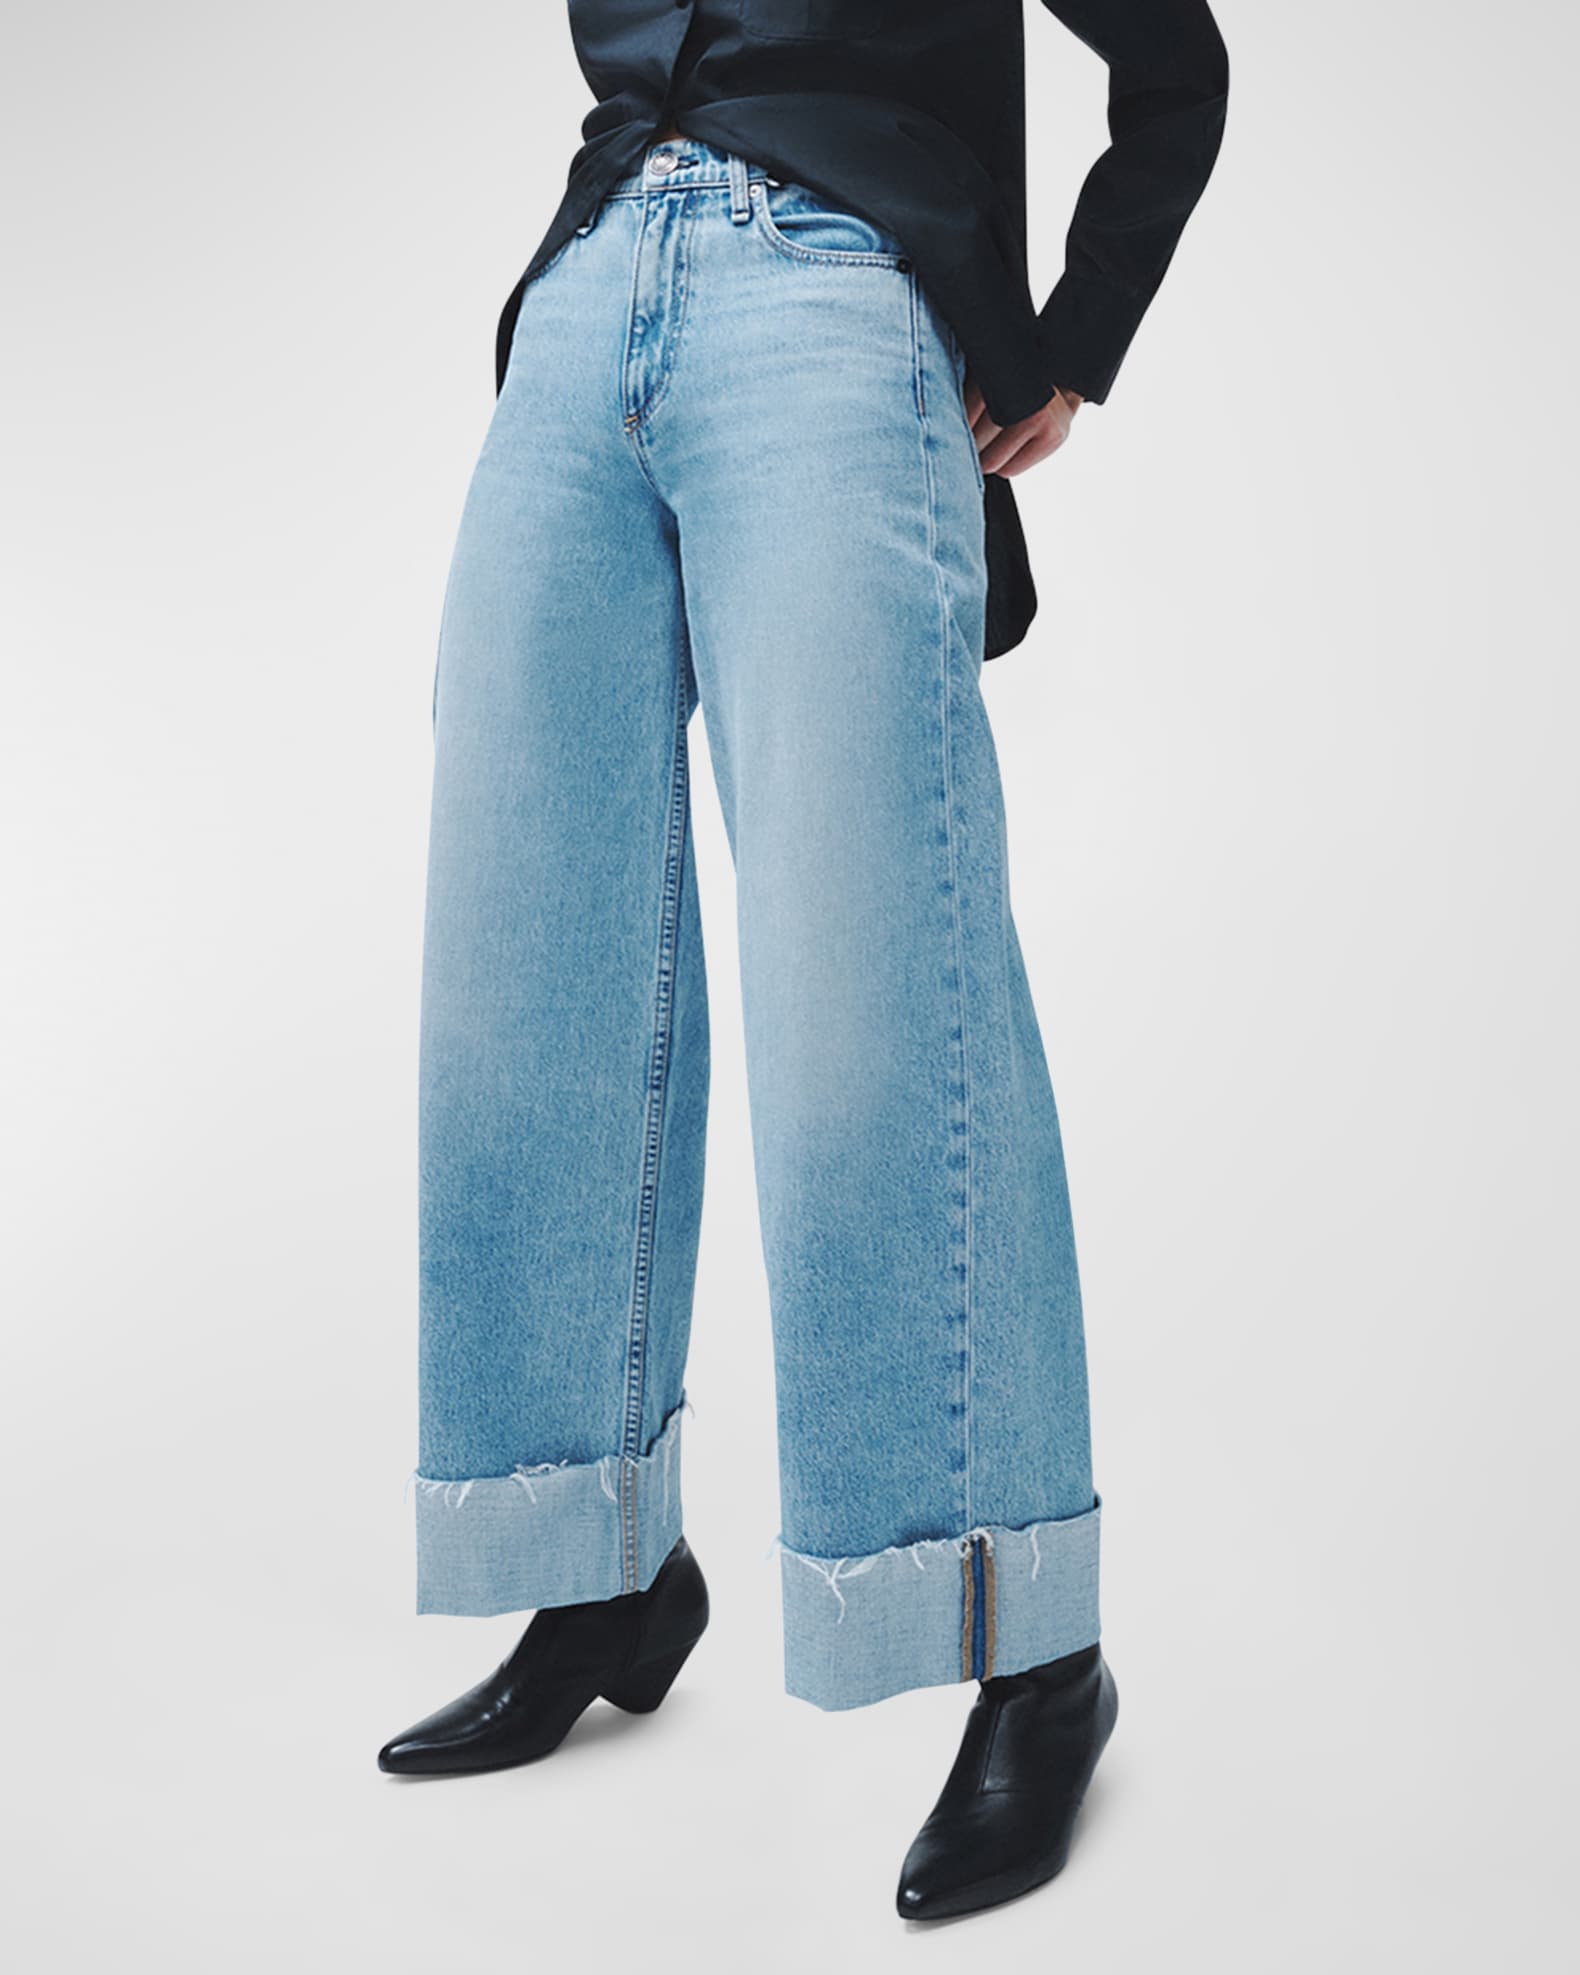 Rag & Bone Sofie High-Stretch Ankle Jeans with Cuff | Neiman Marcus